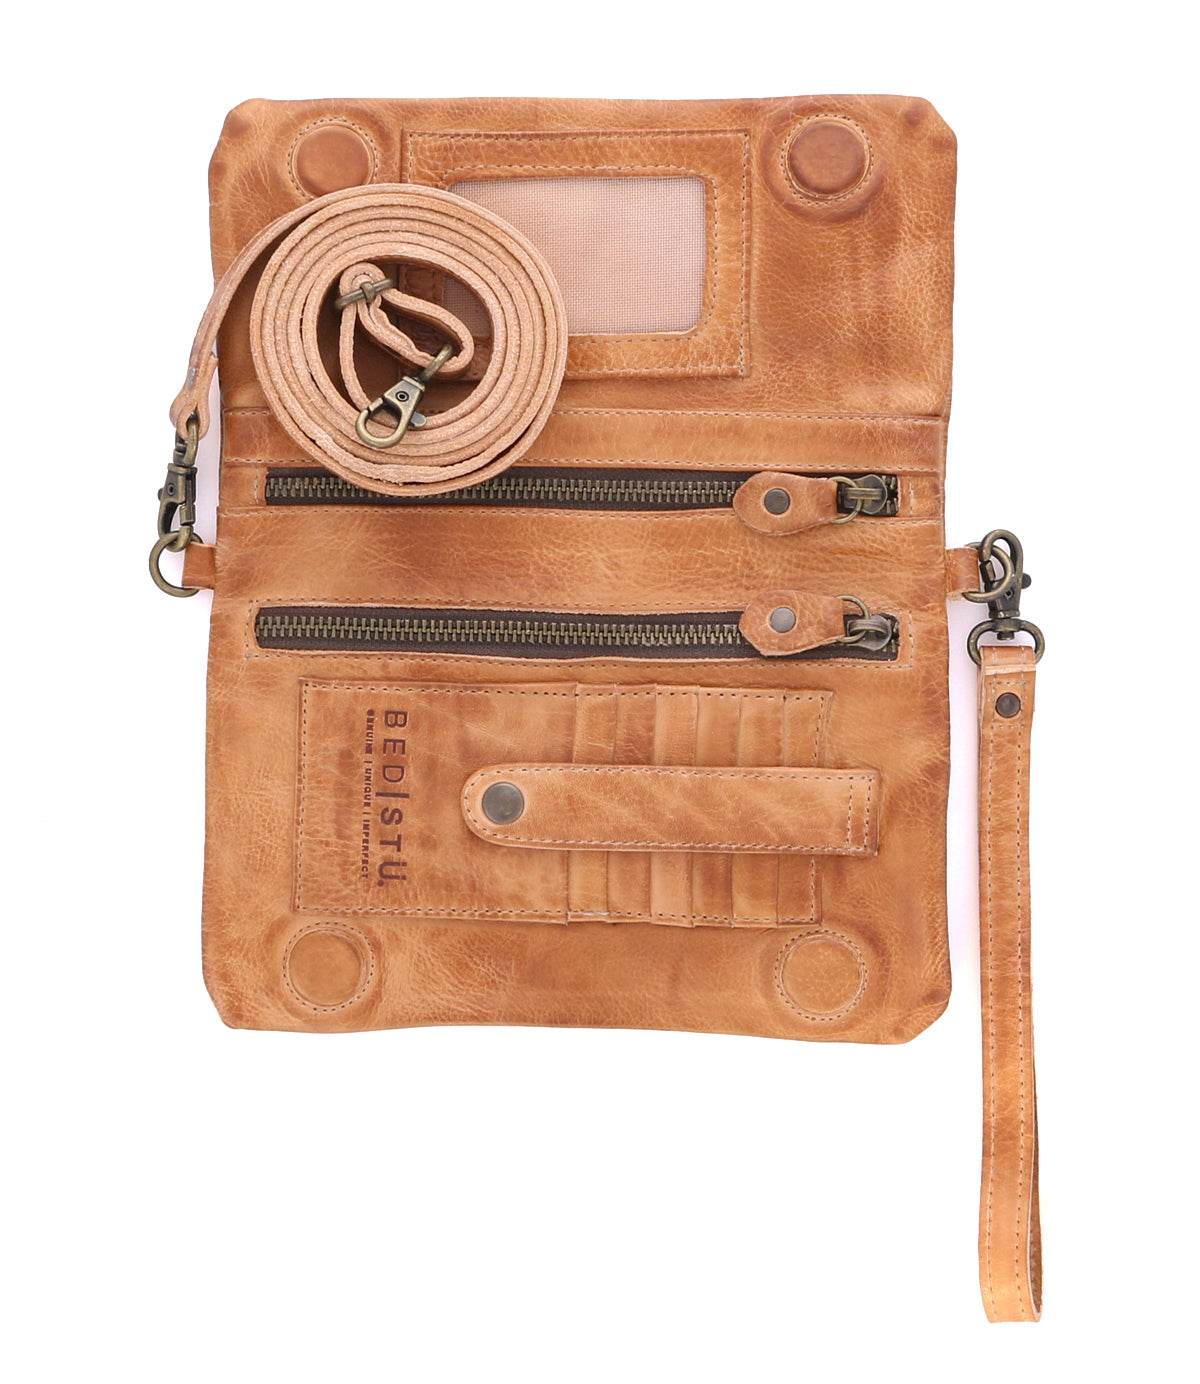 Inside a Cadence tan leather clutch bag by Bed Stu.